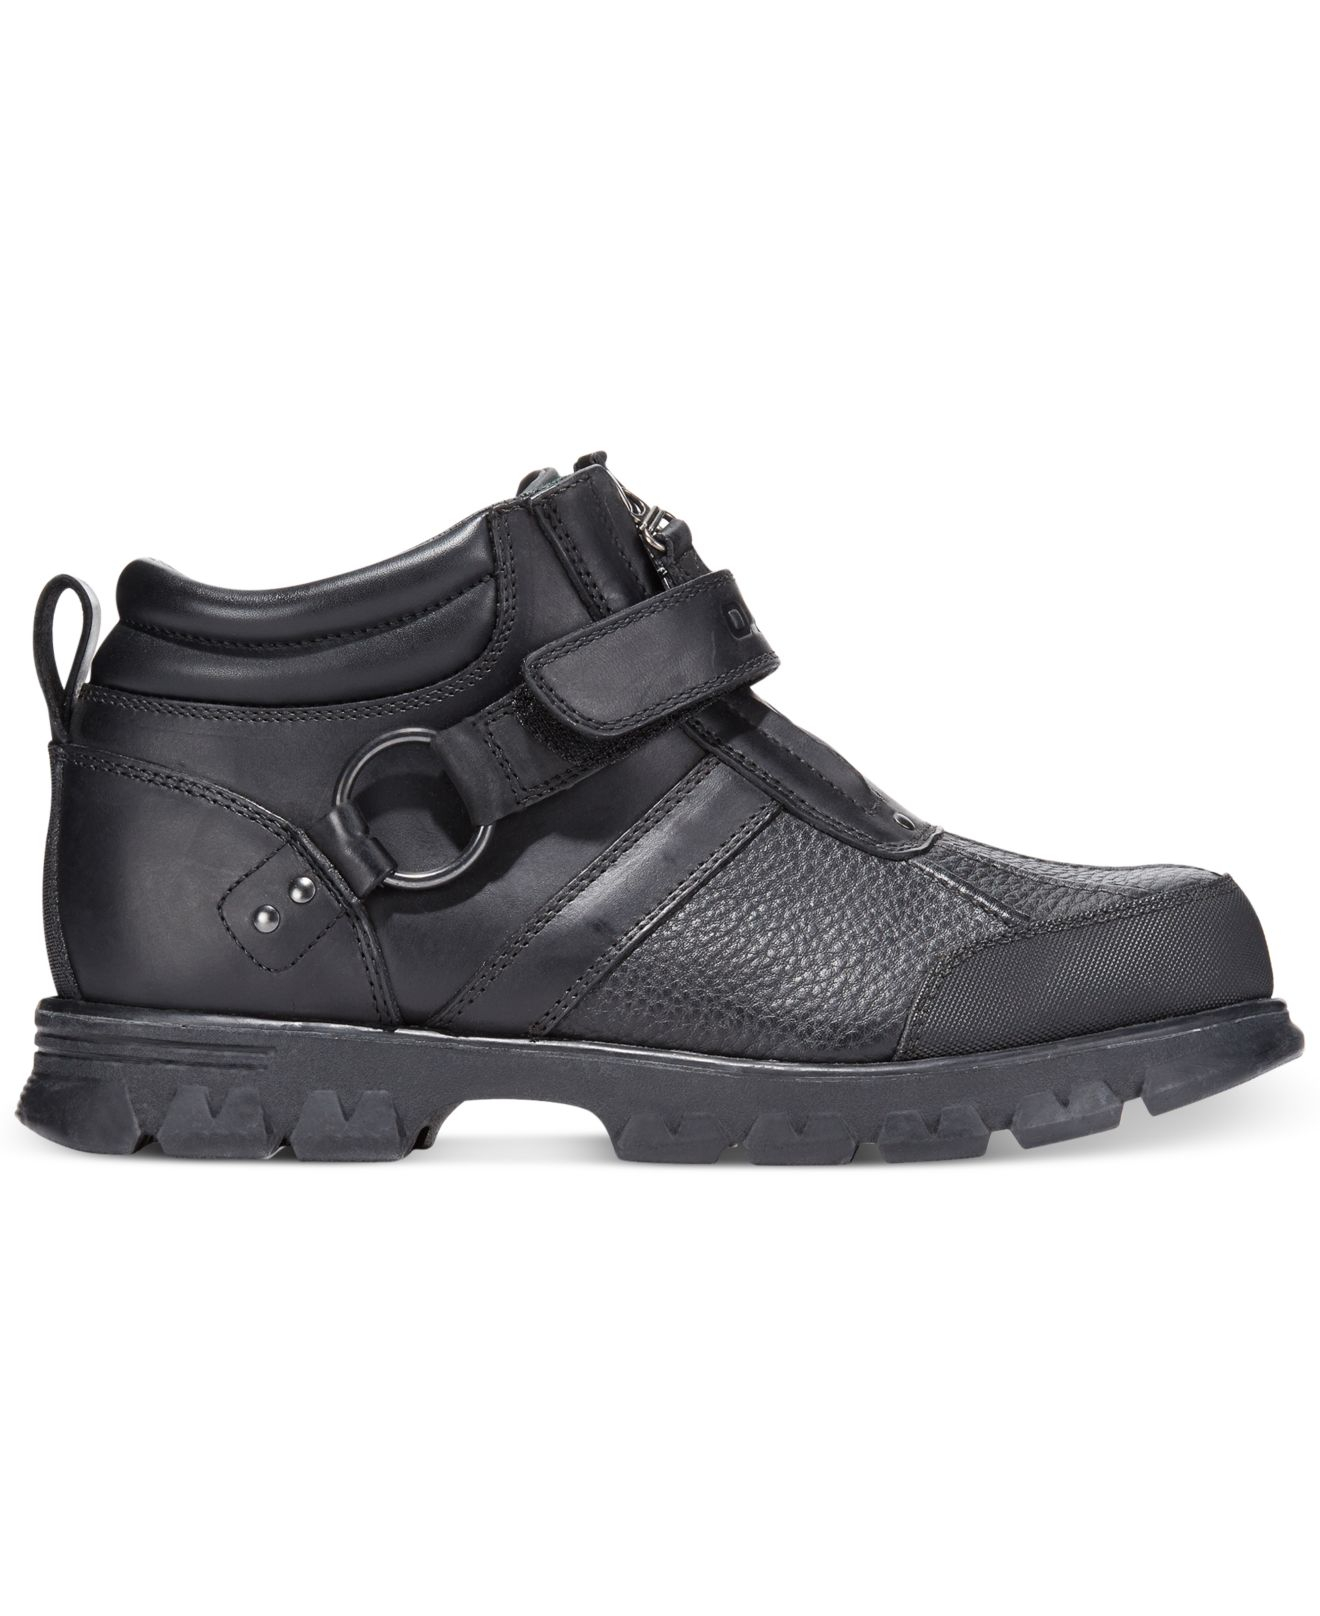 Polo Ralph Lauren Black Conquest Low Boots Product 1 23011993 1 968038822 Normal 